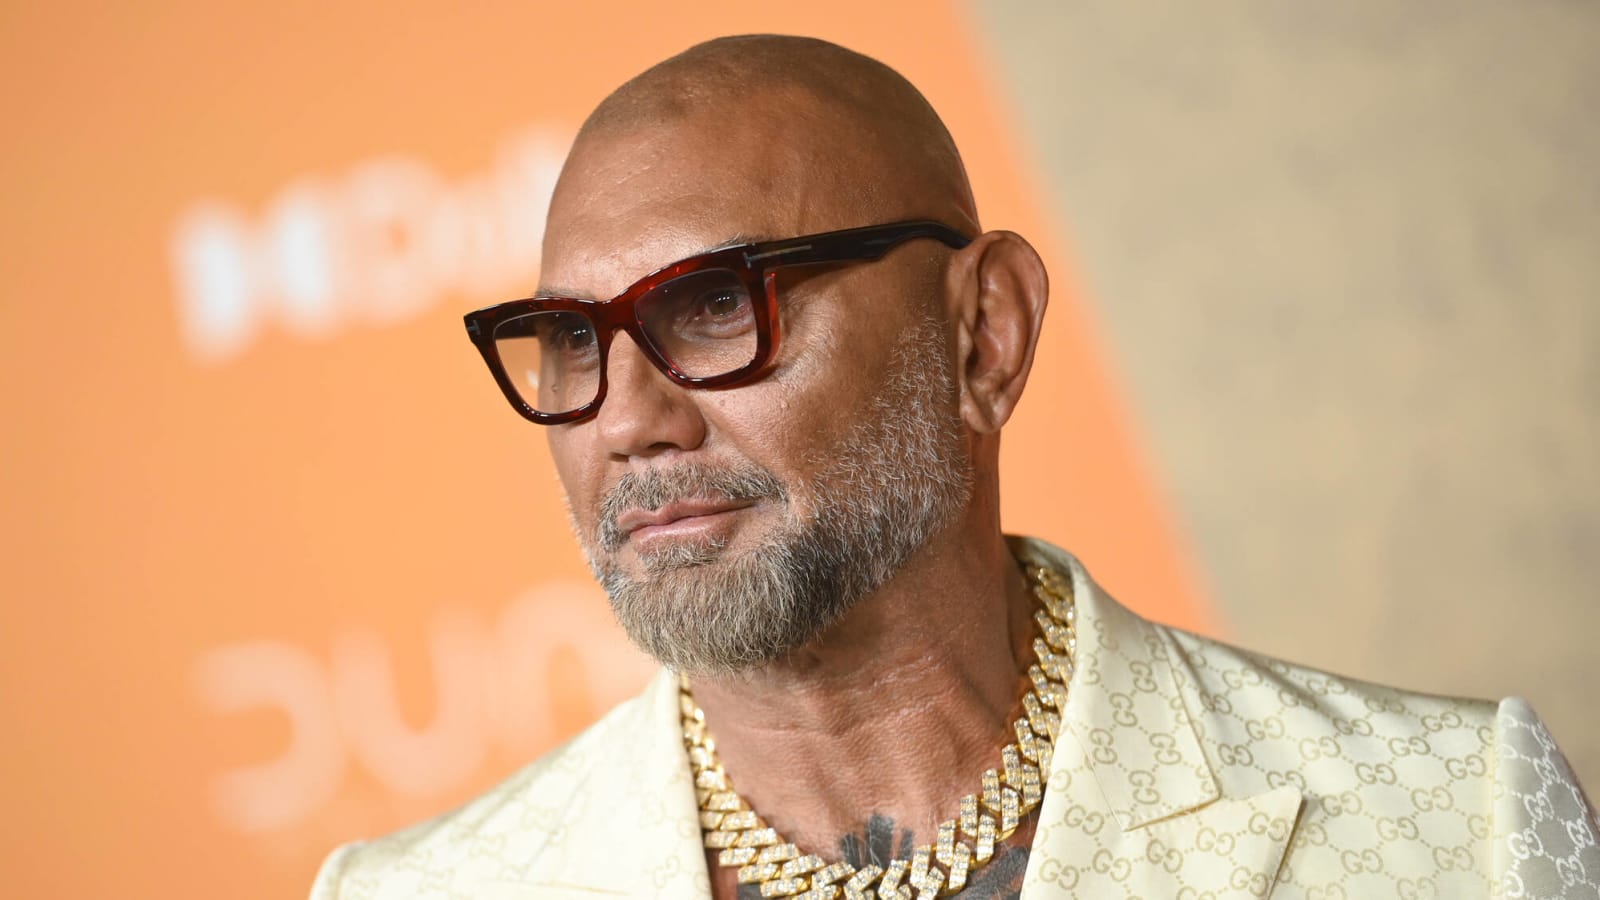 WWE legend Dave Bautista set to appear in The Jim Henson Company’s live-action monster tale ‘Grendel’